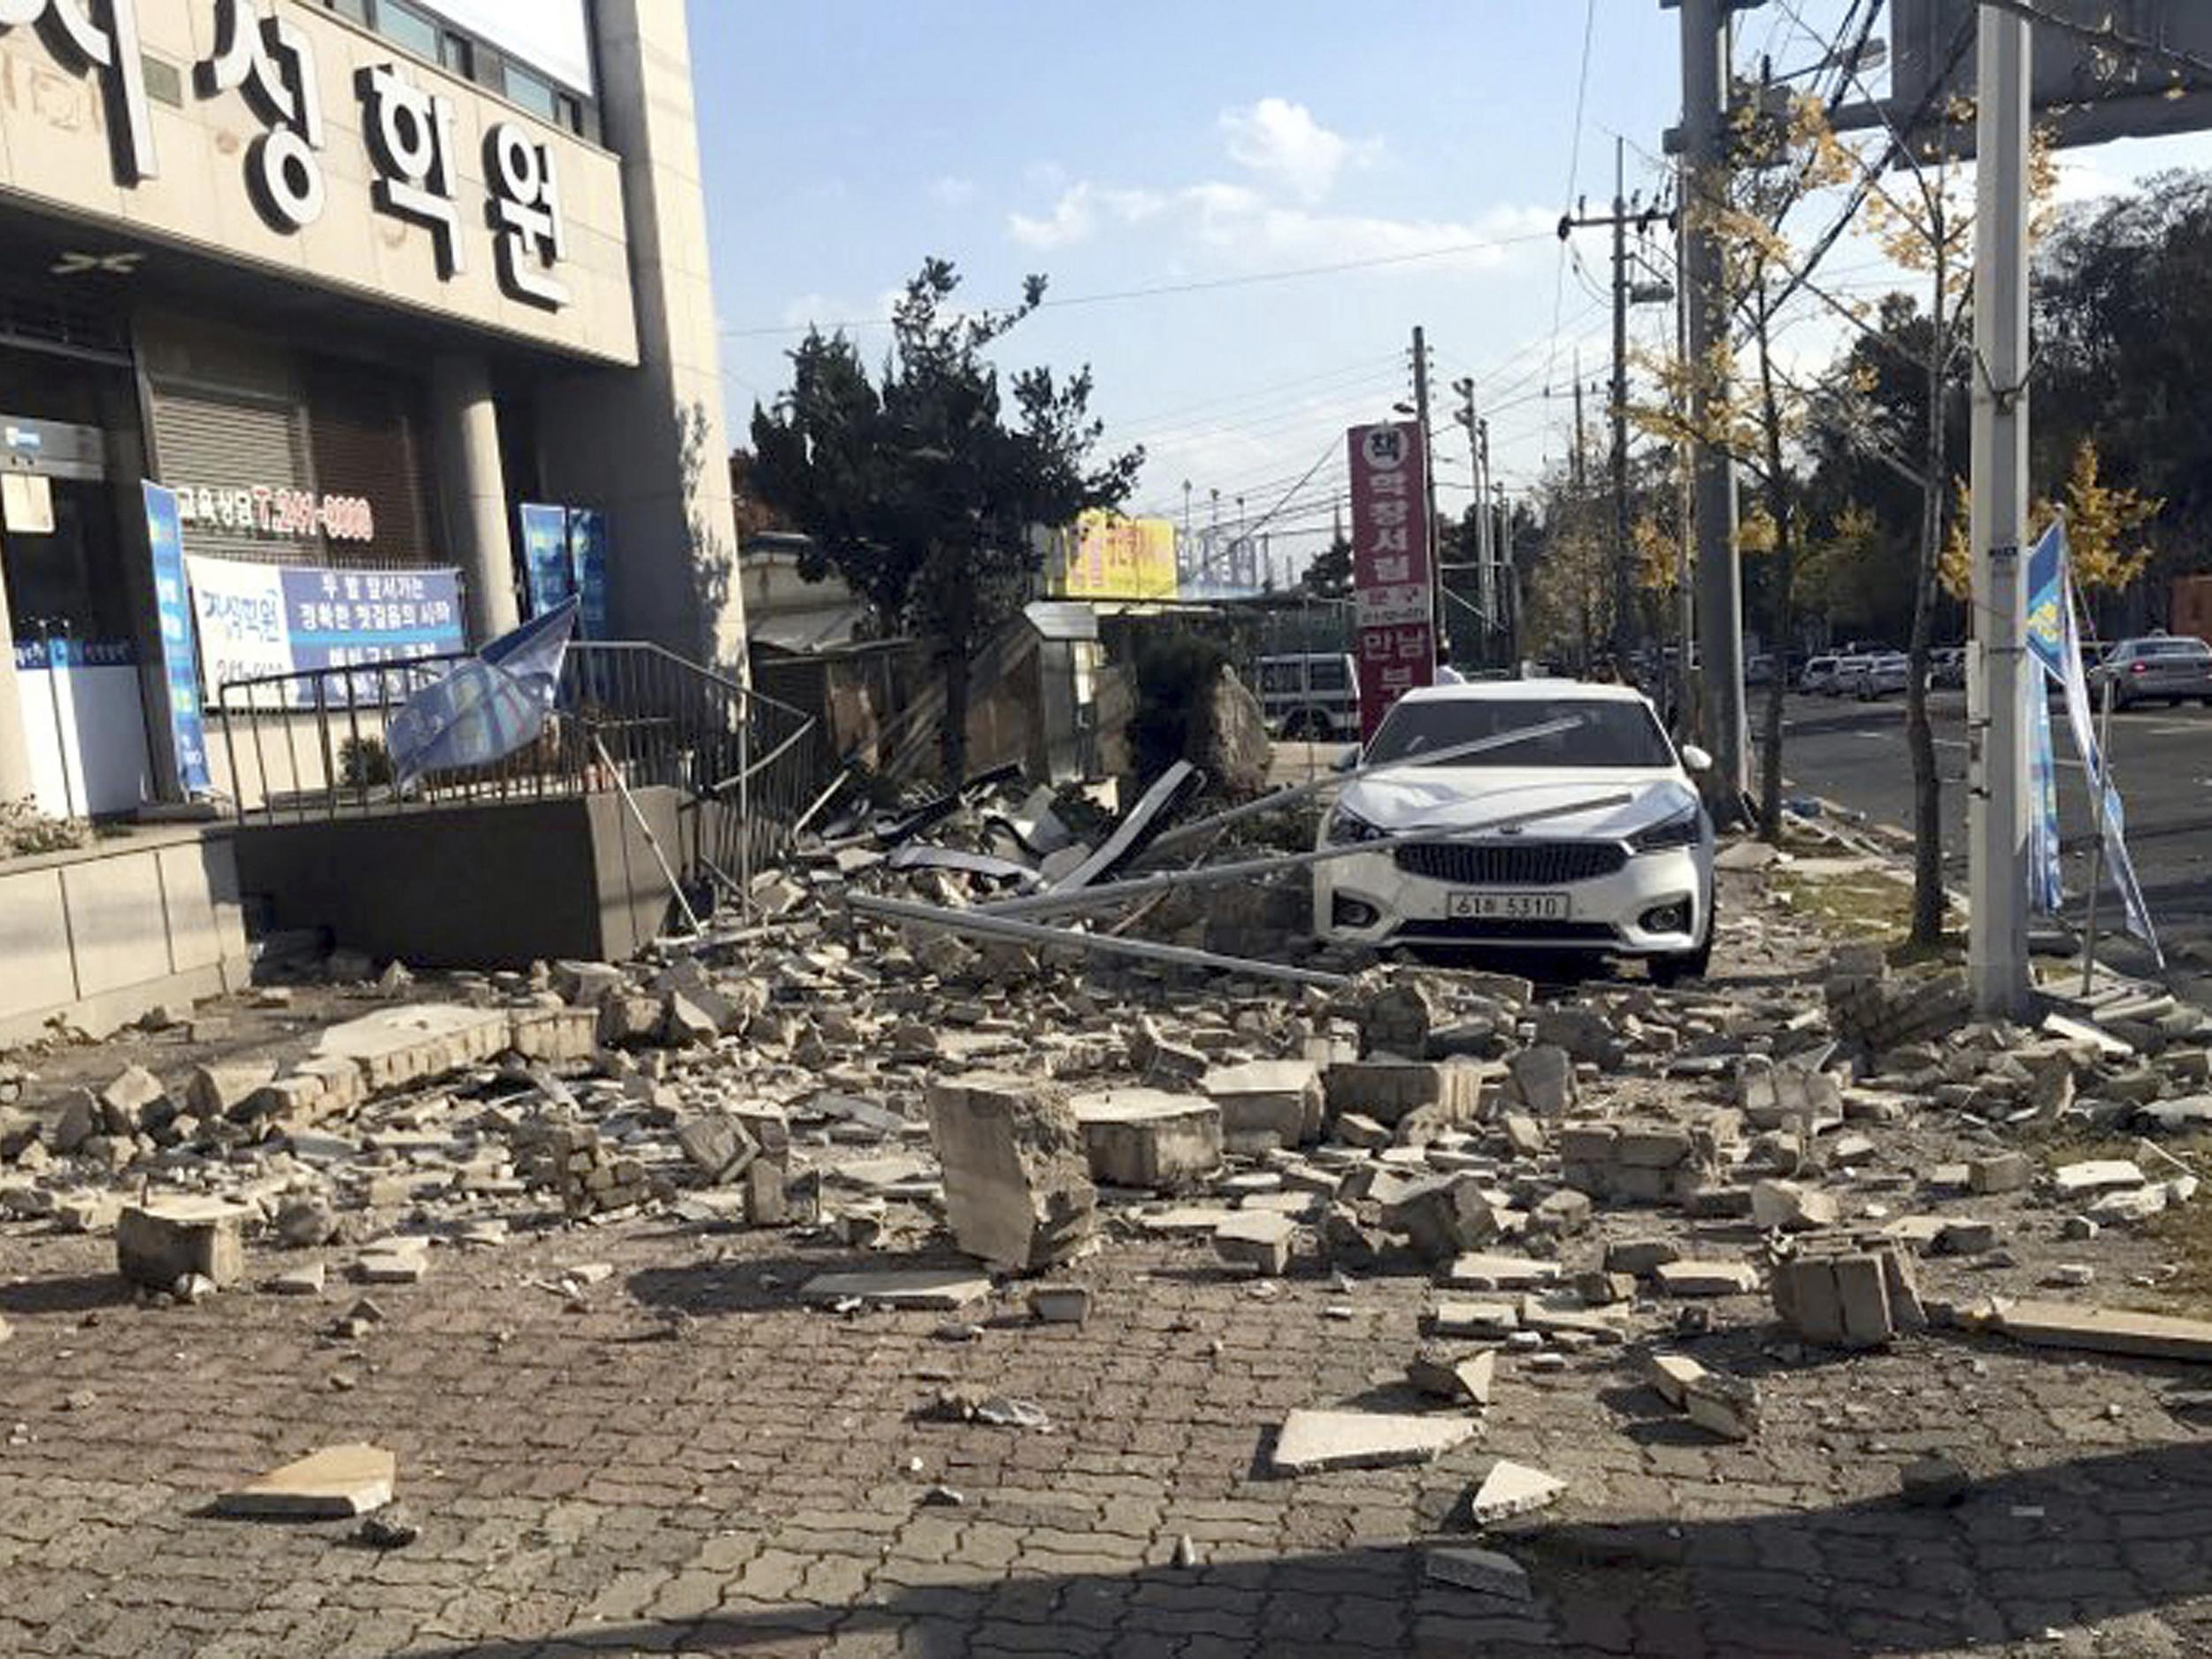 Debris from a collapsed wall is scattered in front of a shop after an earthquake in Pohang